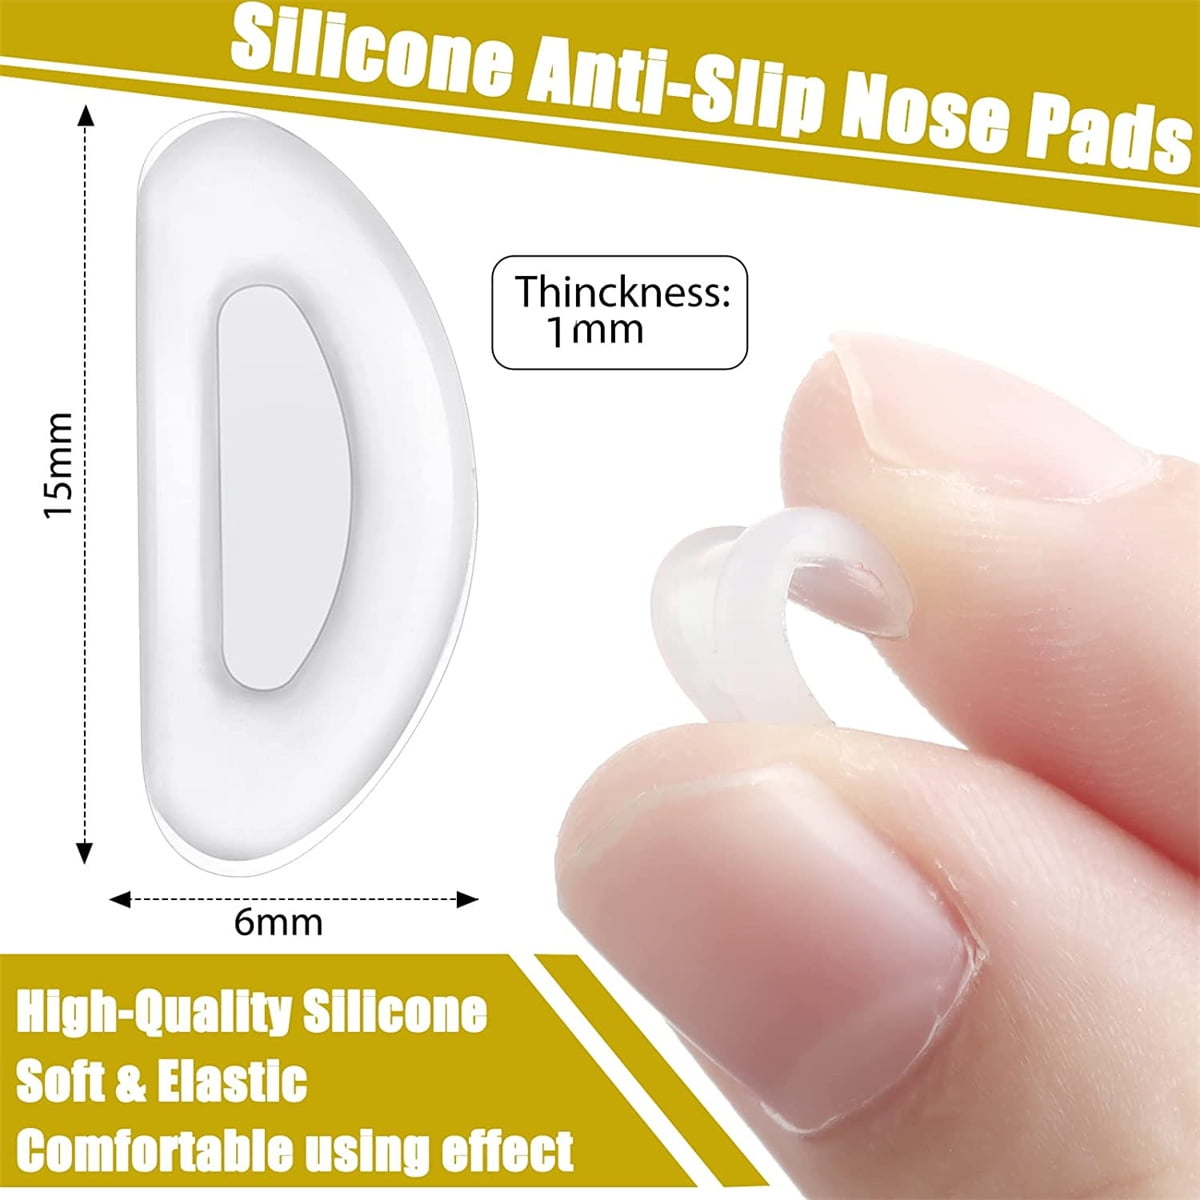 Clear Self-adhesive 3M Silicone Nose Pads (12 pairs) – Klear-Sanitizer